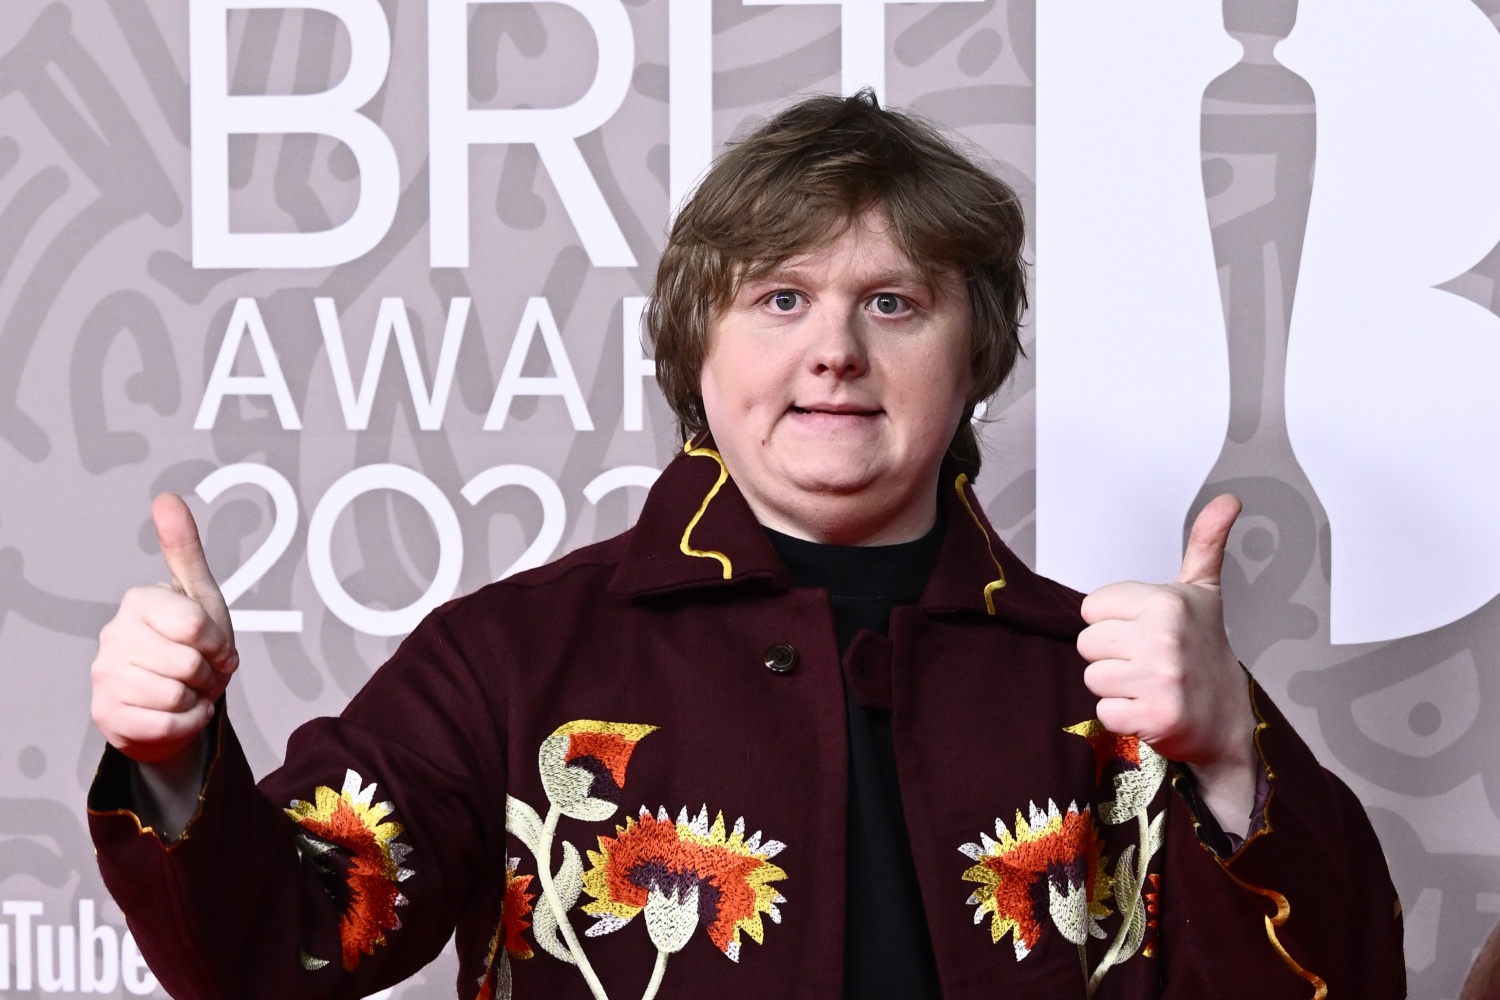 Lewis Capaldi Shares Heartbreaking Update on His Music Return Months After Announcing Hiatus